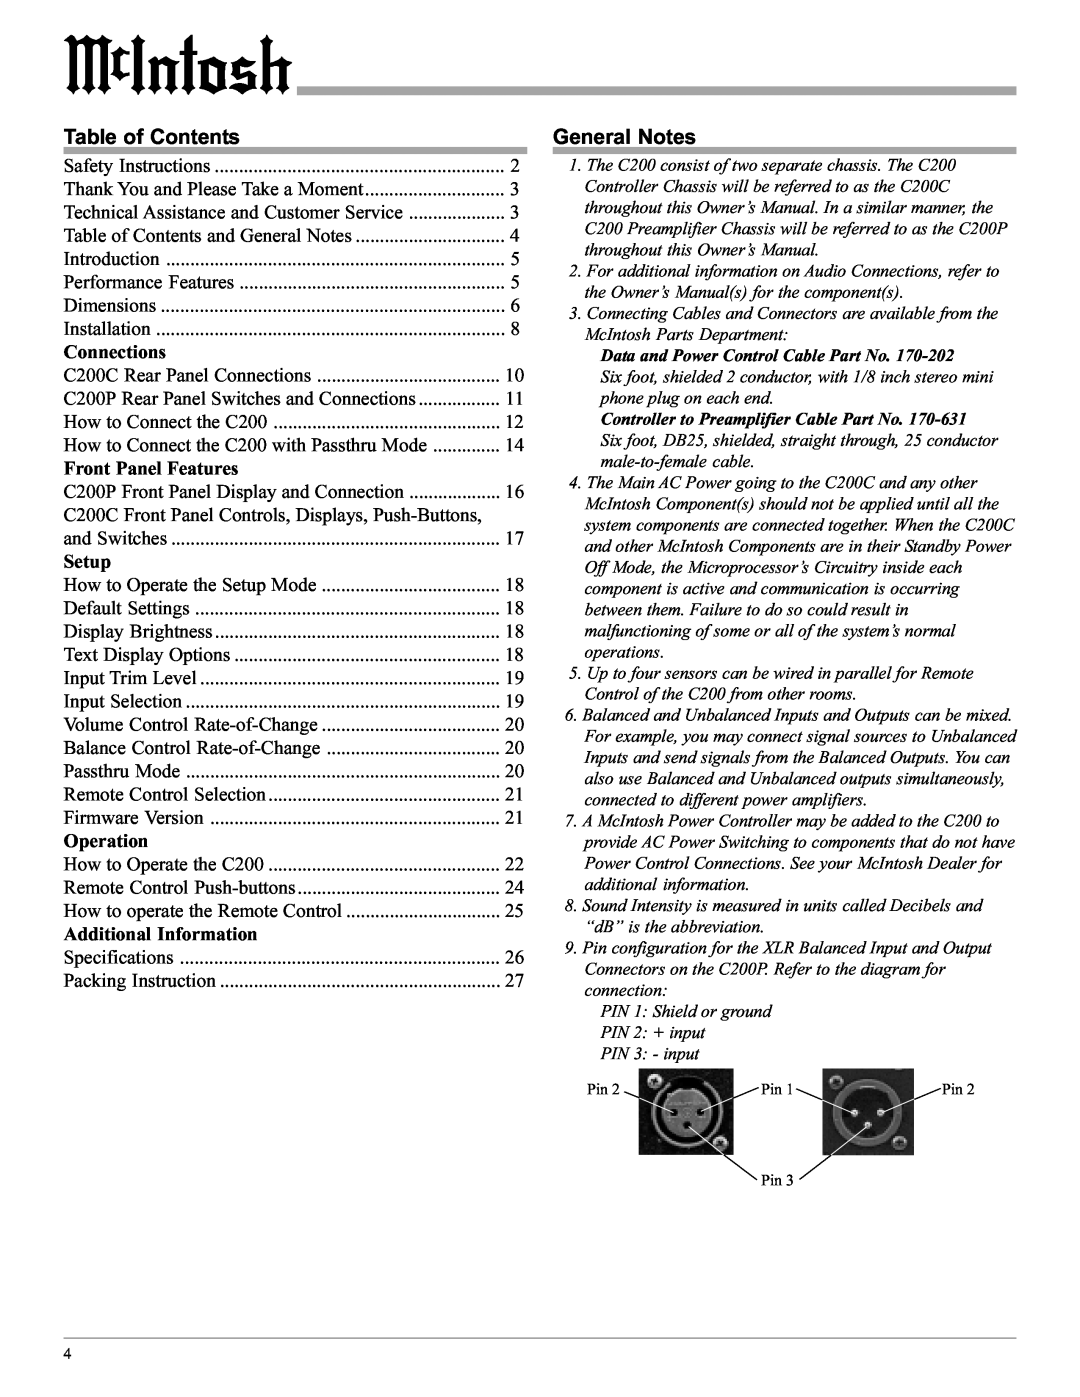 McIntosh C200 manual Table of Contents, General Notes, Connections, Front Panel Features, Setup, Operation 